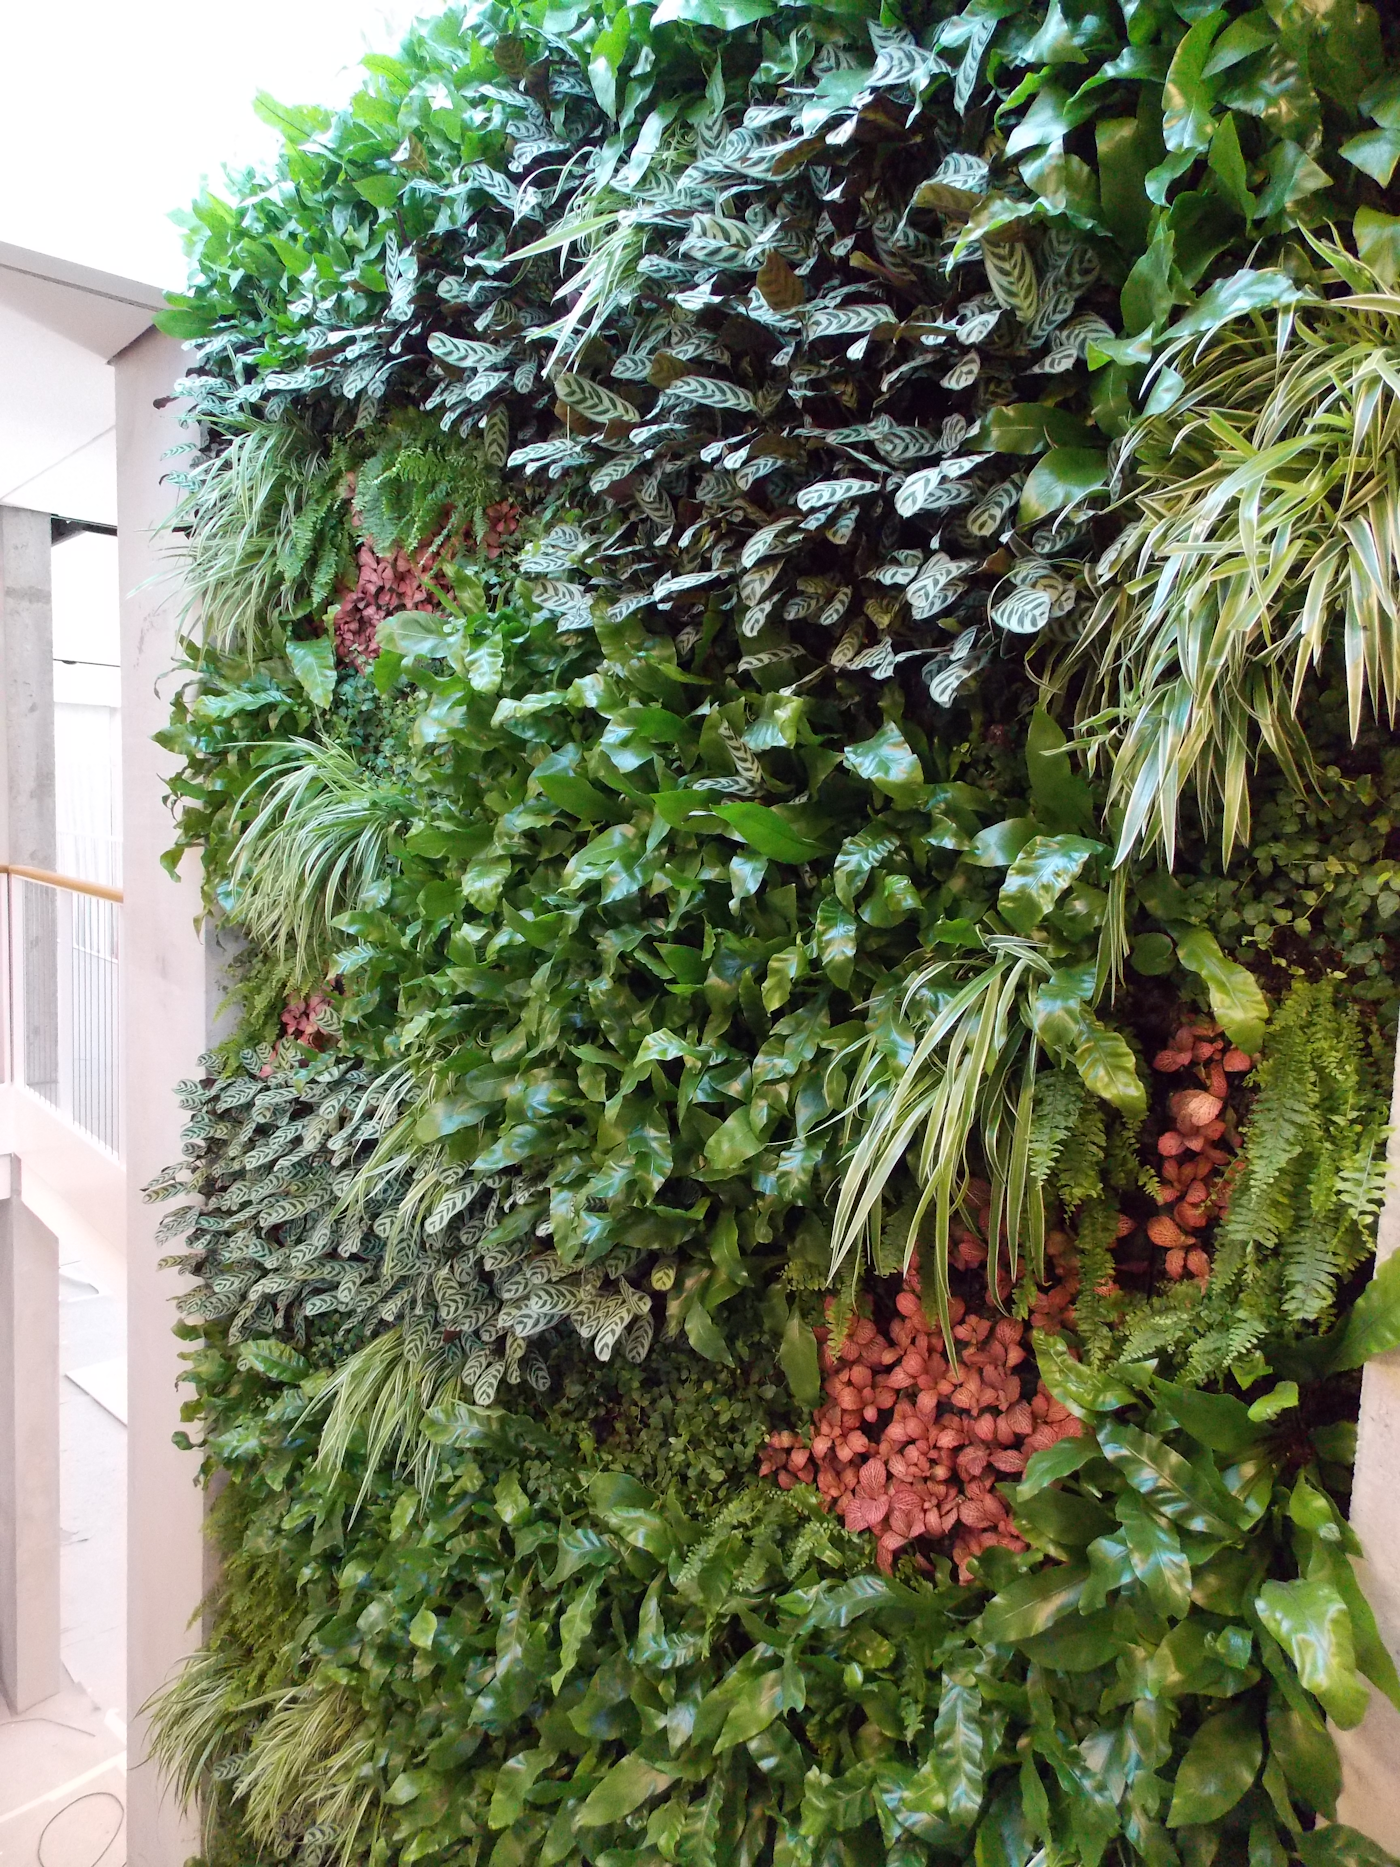 interior plants in a living wall in an atrium